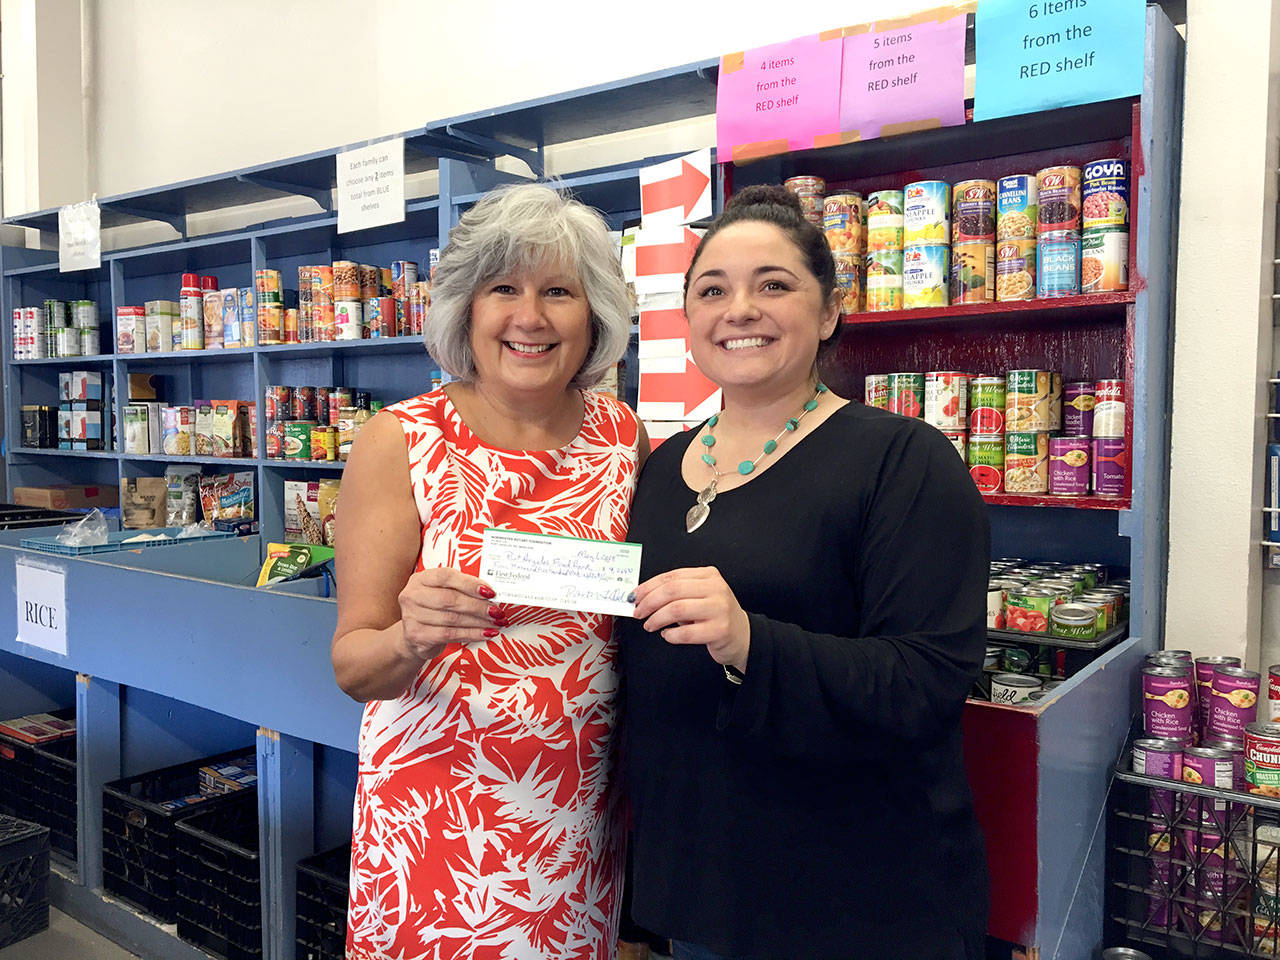 From left, Vivian Hansen, president of Nor’wester Rotary of Port Angeles, presents a $4,268.83 check to Jessica Hernandez, Port Angeles Food Bank executive director. The funds were raised through various rotary meetings.